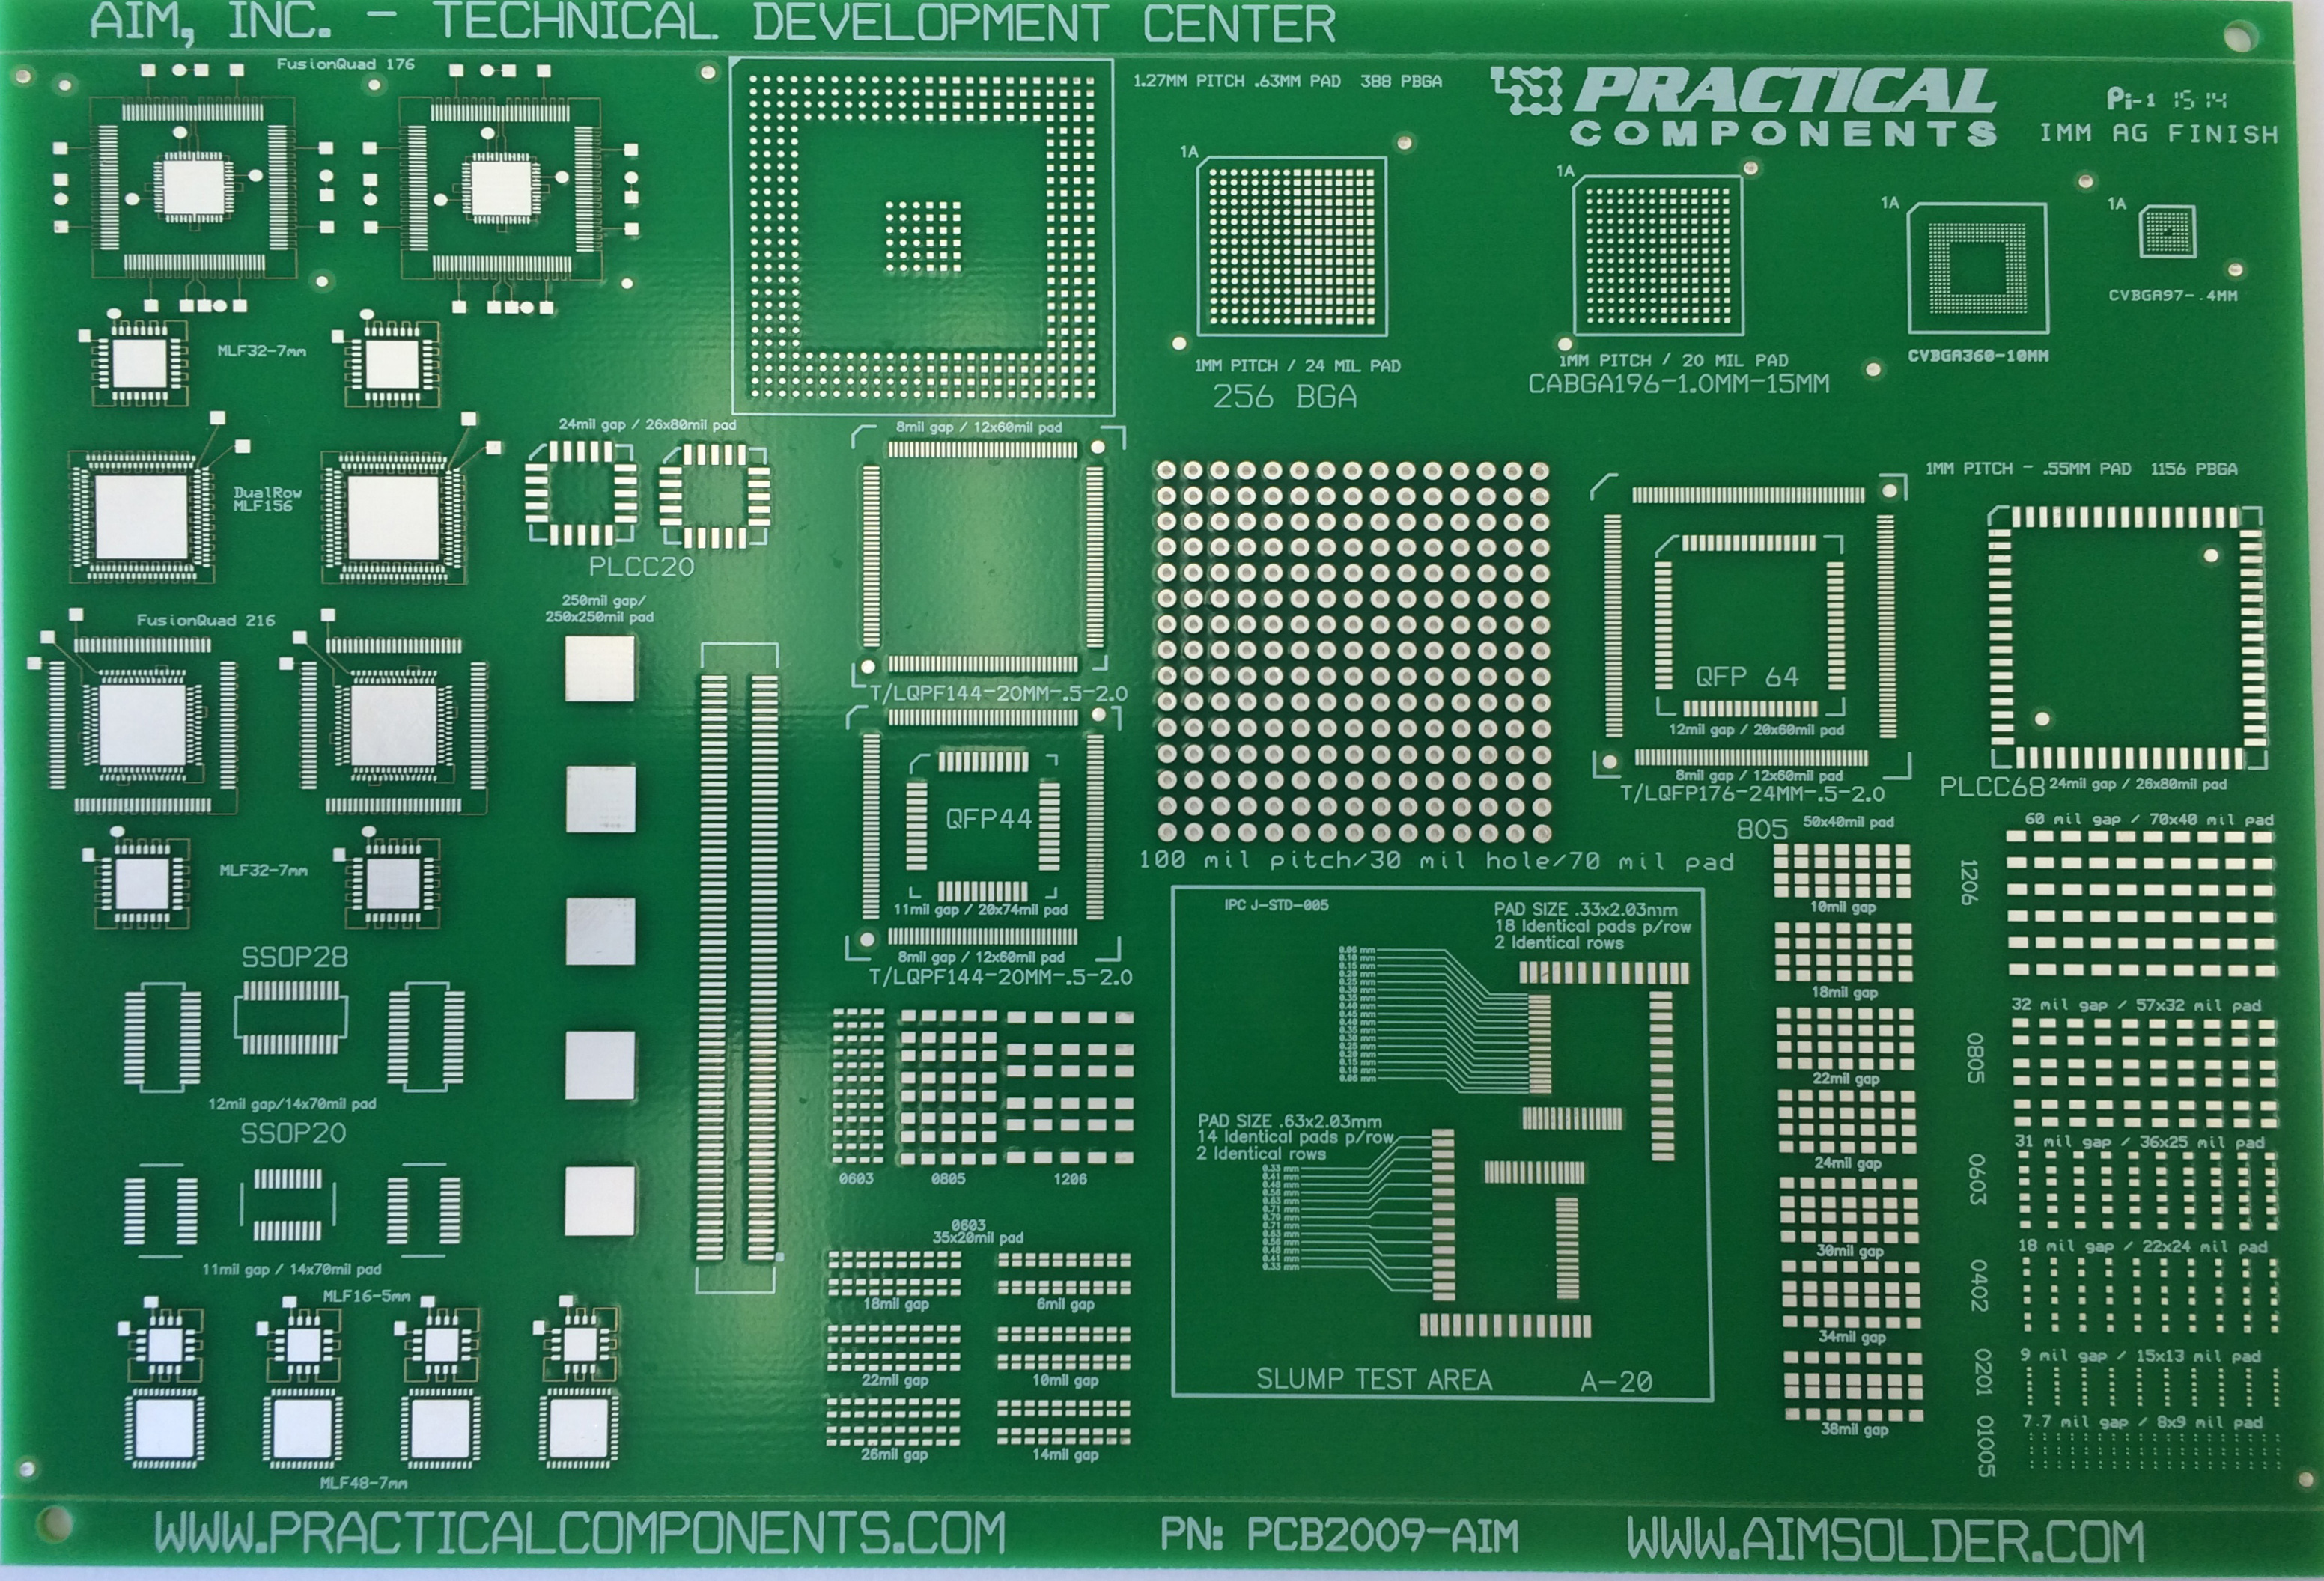 PC2009 Rev A AIM Solder Print Test Board and Kit